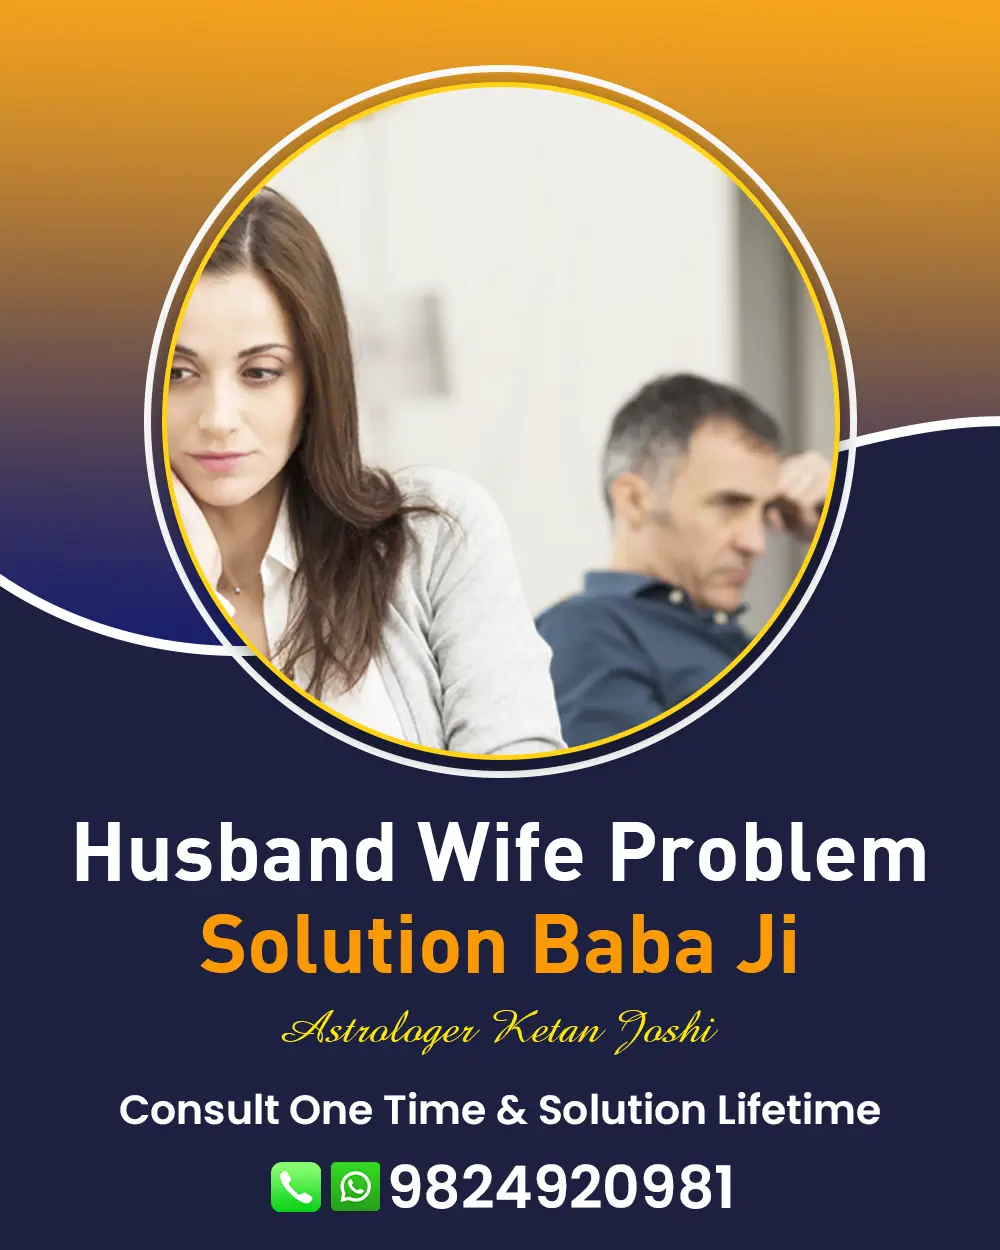 Husband Wife Problem Solution in Jetpur